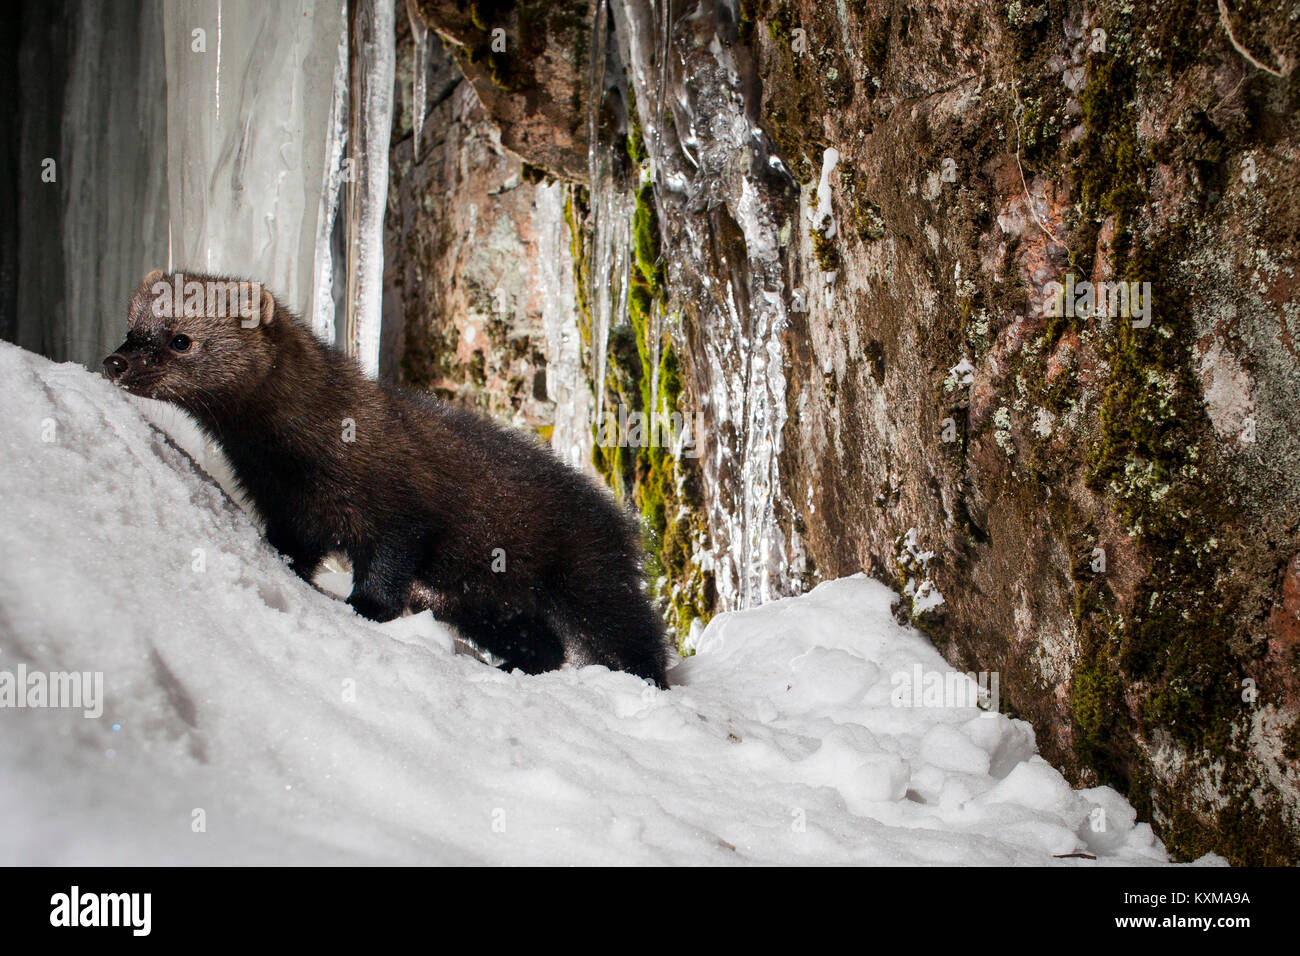 MAYNOOTH, HASTINGS HIGHLANDS, ONTARIO, CANADA - January 10, 2018: A fisher (Martes Pennanti), part of the weasel family / Mustelidae forages for food. Stock Photo